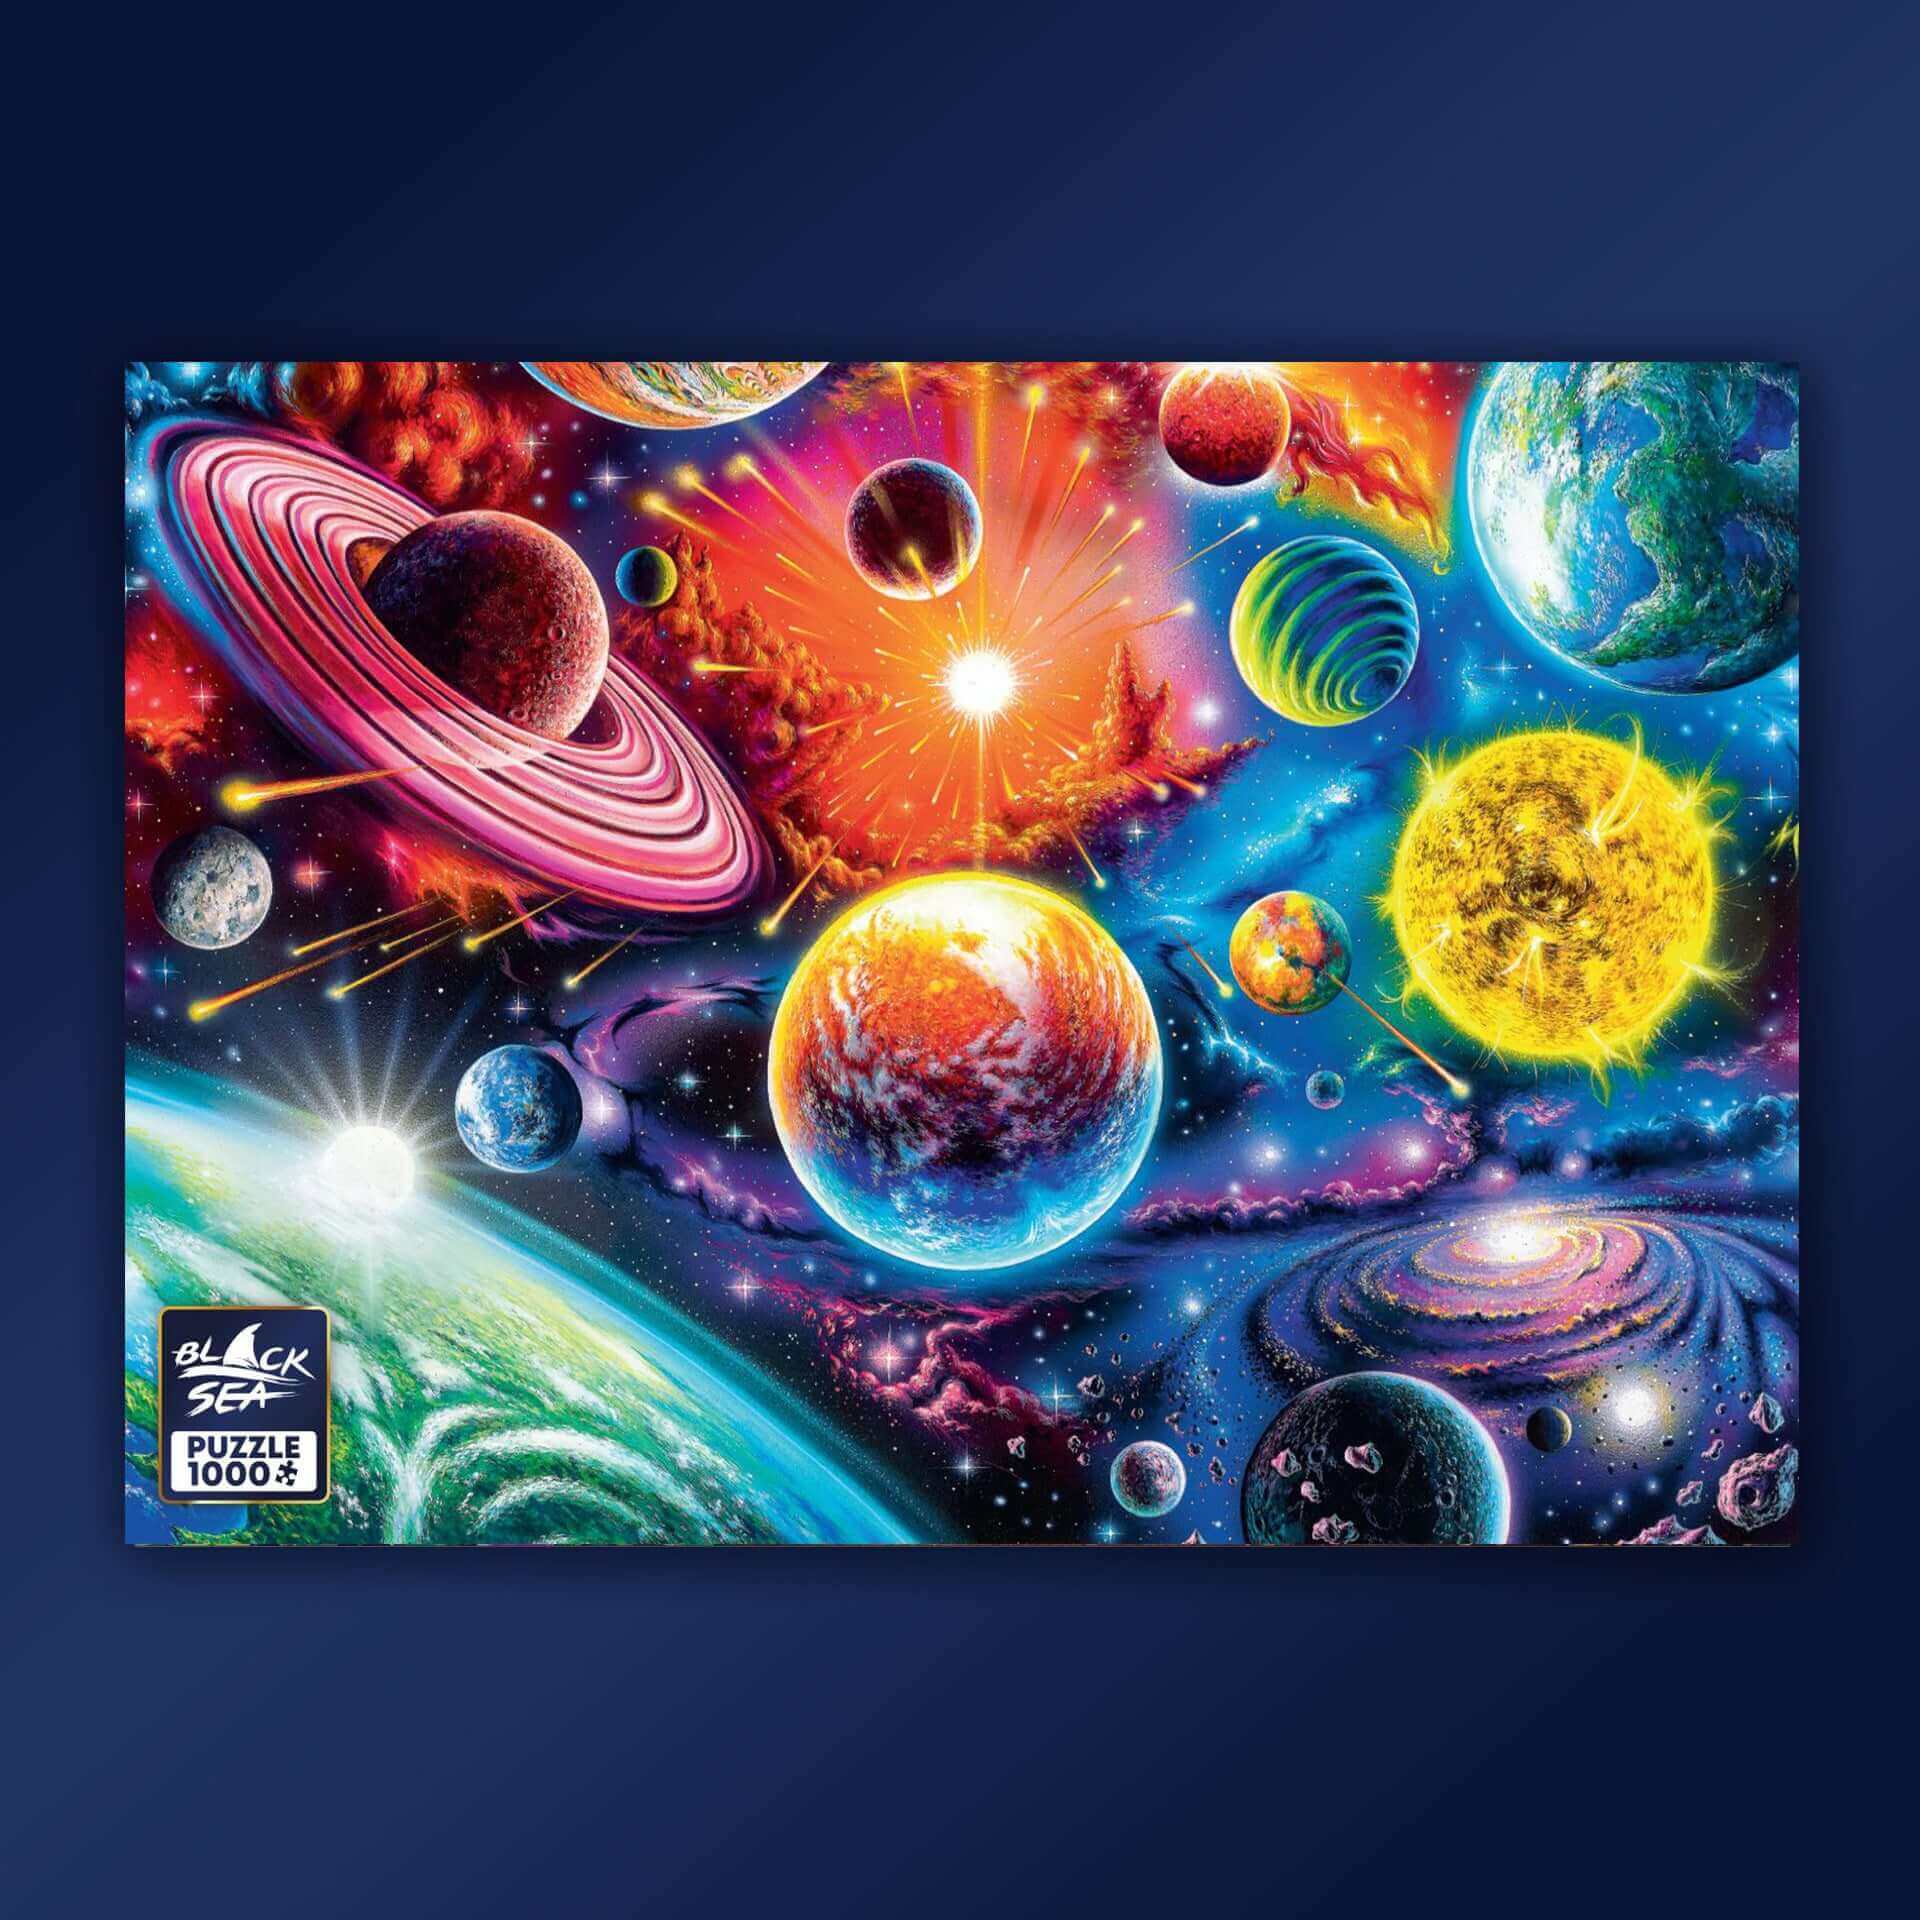 Puzzle Black Sea Premium 1000 pieces - Cosmic Spectacle, A spectacle of colors - this is the first impression when we see Mark Gregory’s painting, recreating the Space. The abundance of nuances and details turns this space scene into an exceptional puzzle